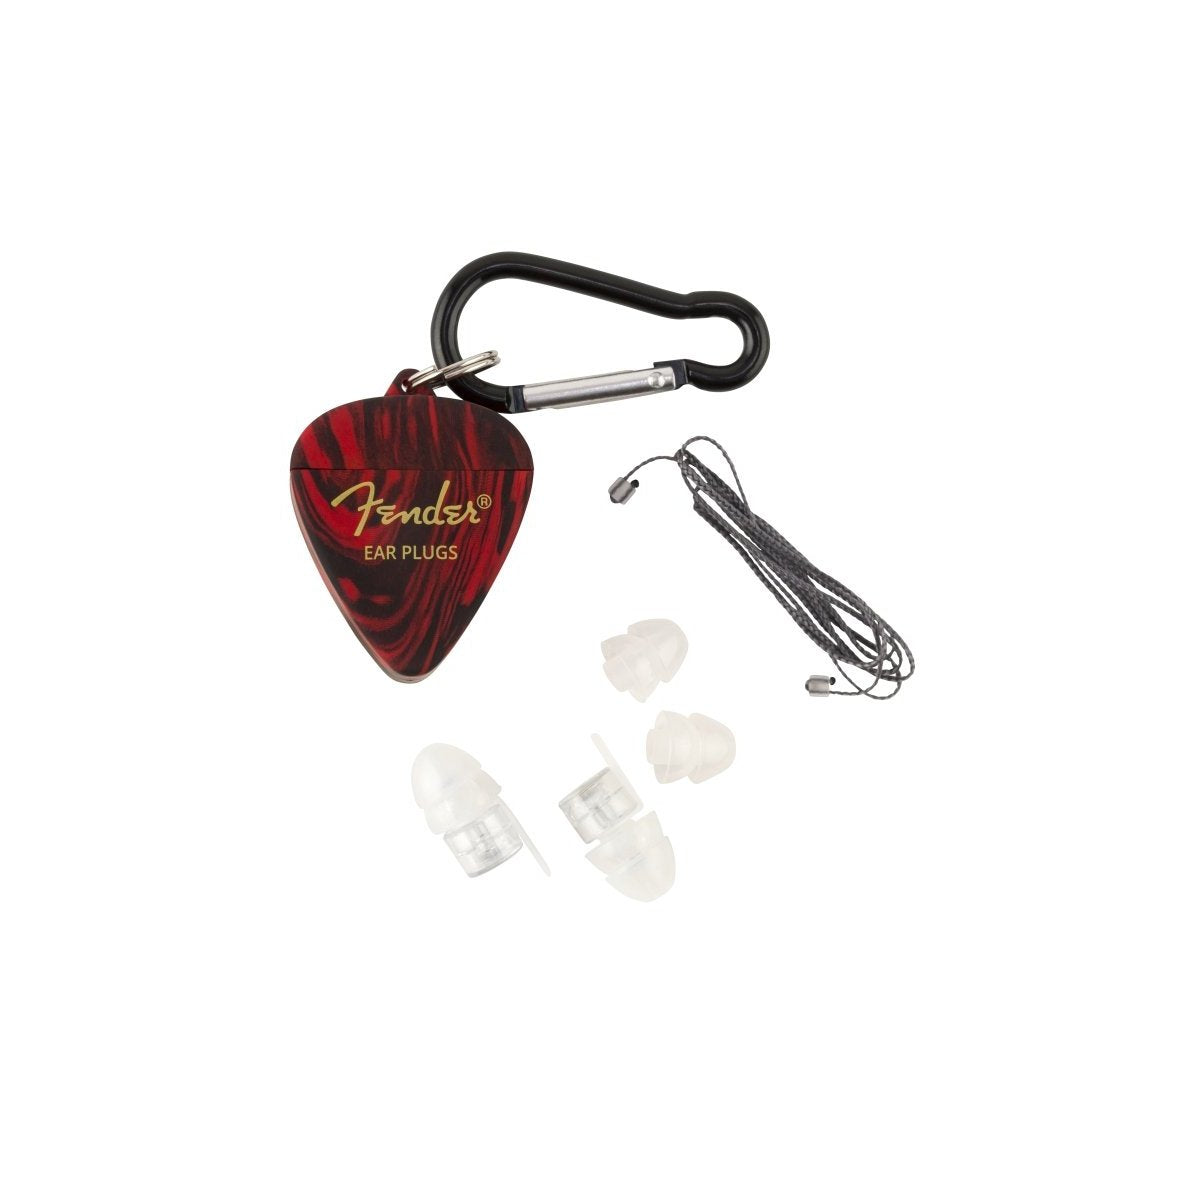 Fender Professional Hi-Fi Earplugs with Carrying Case-Music World Academy